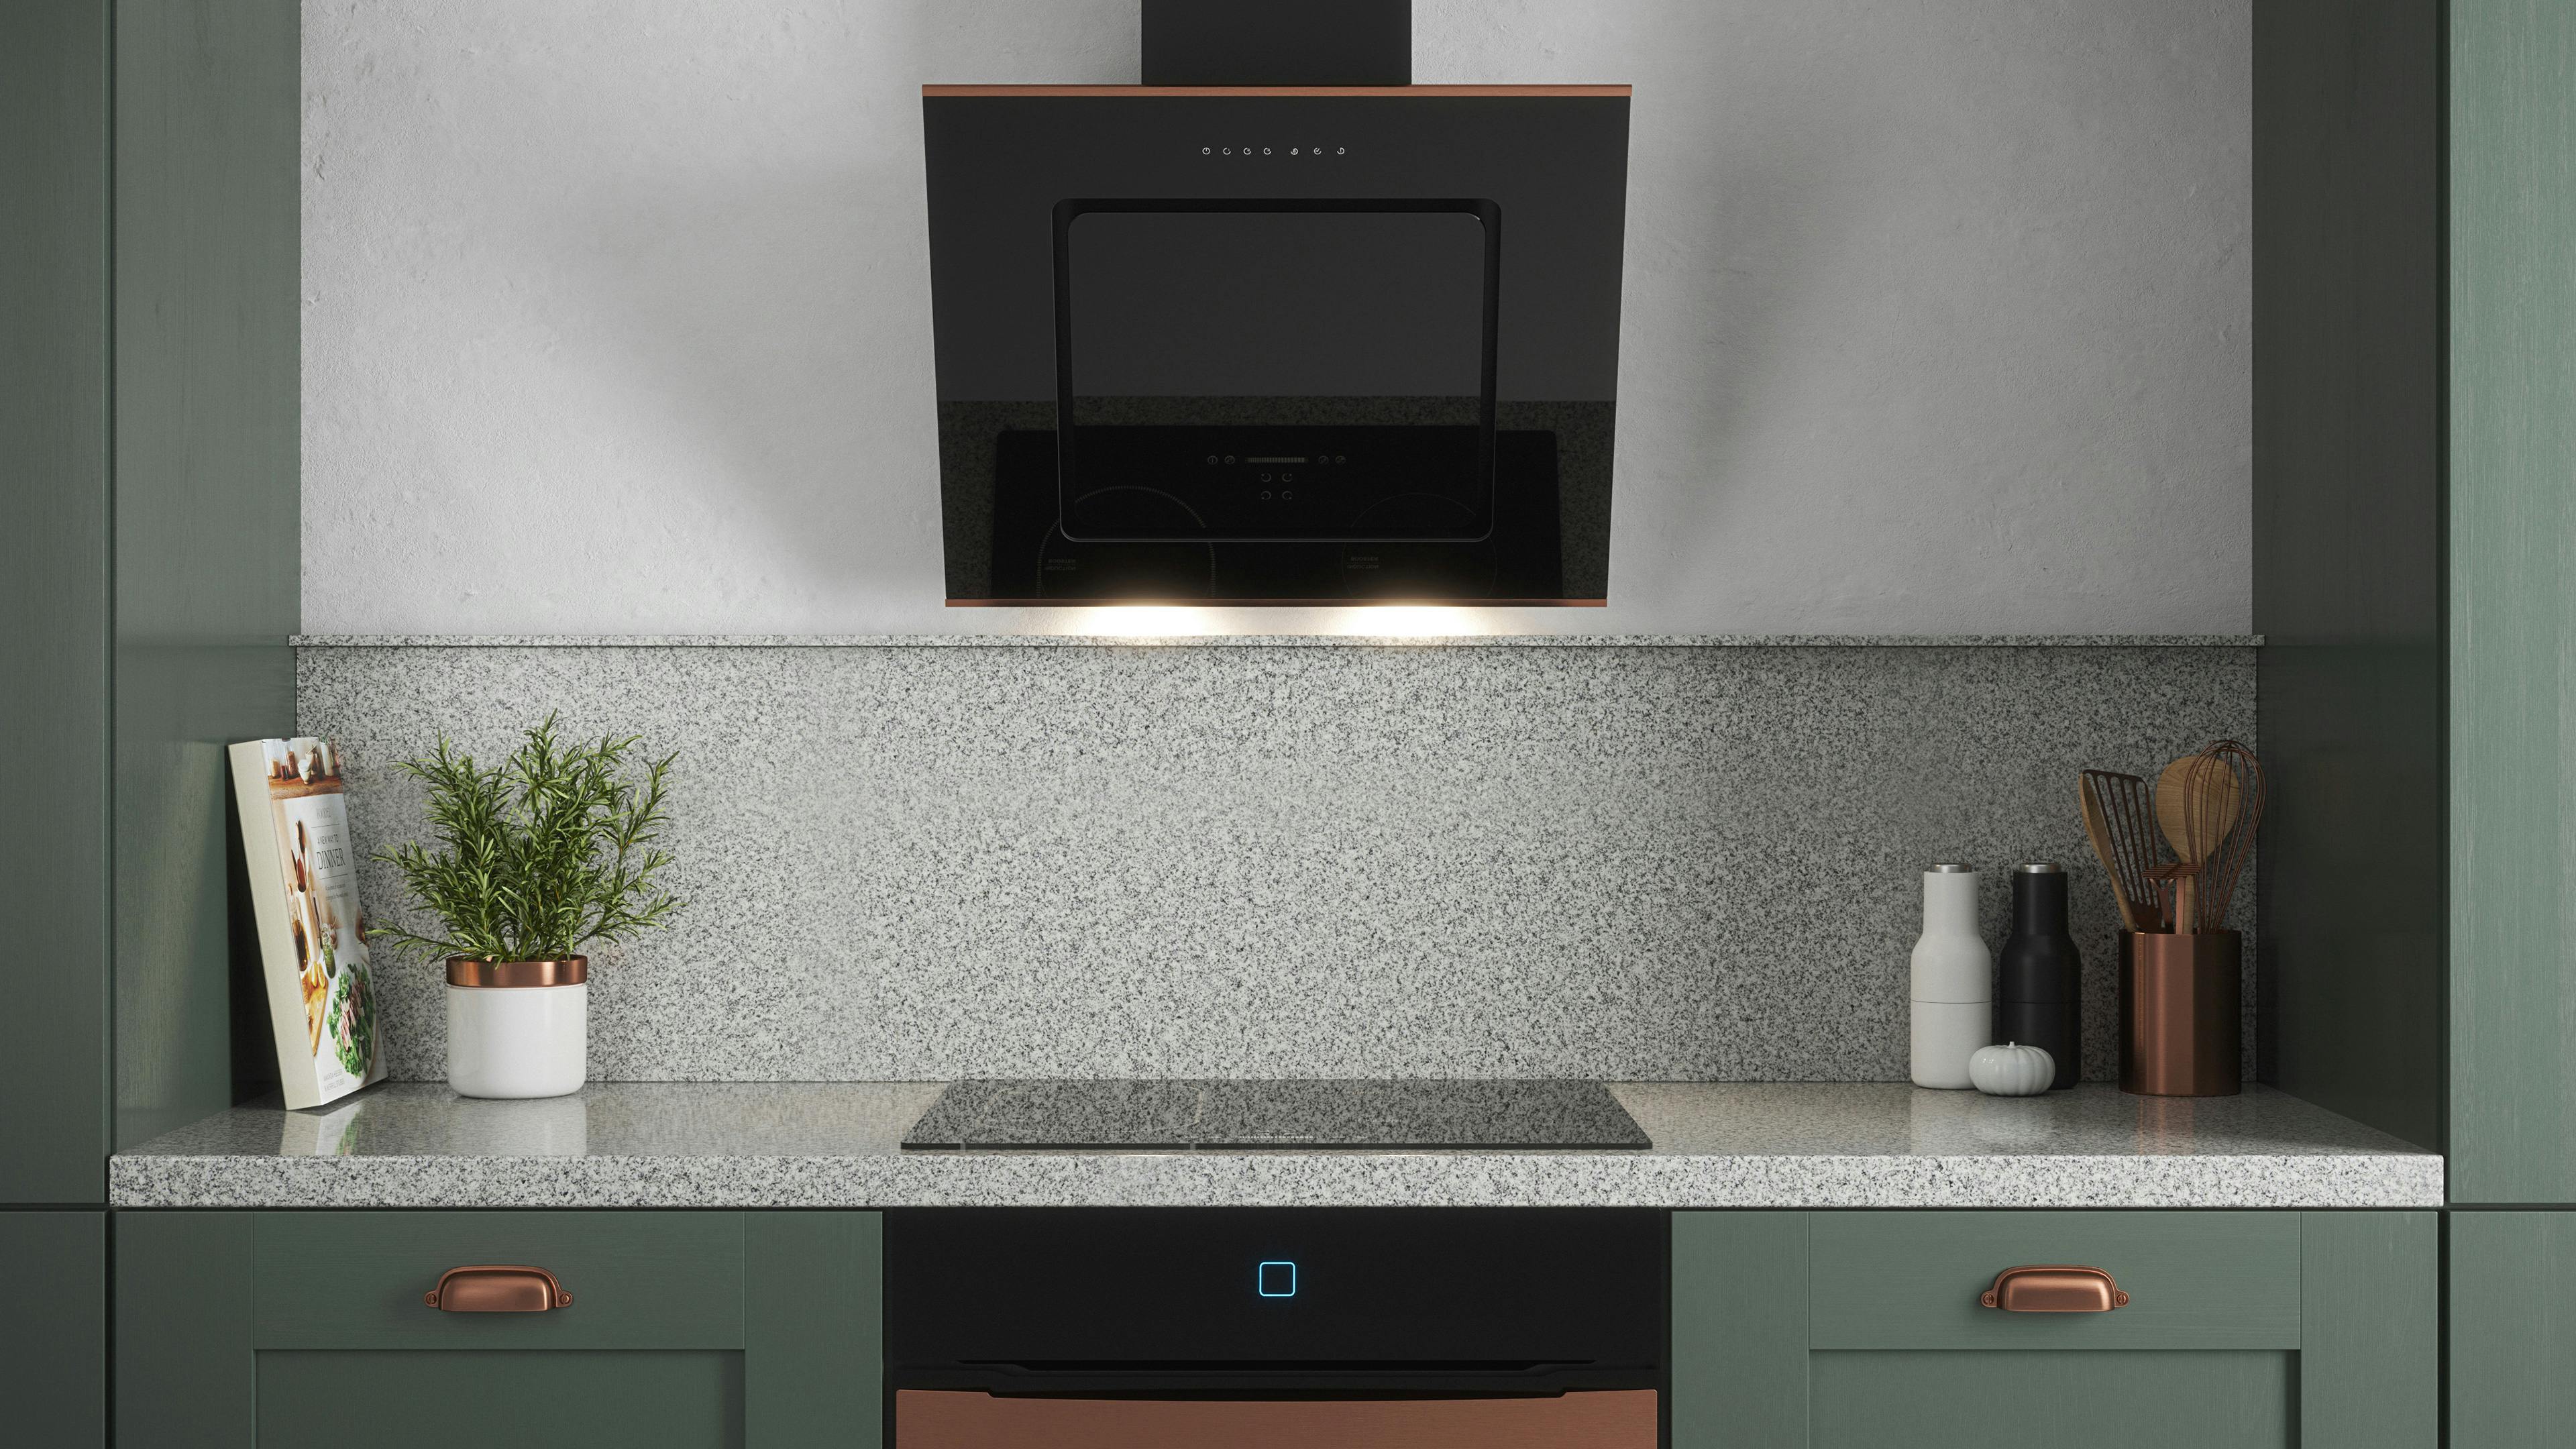 What are the Regulations on Cooker Hoods?